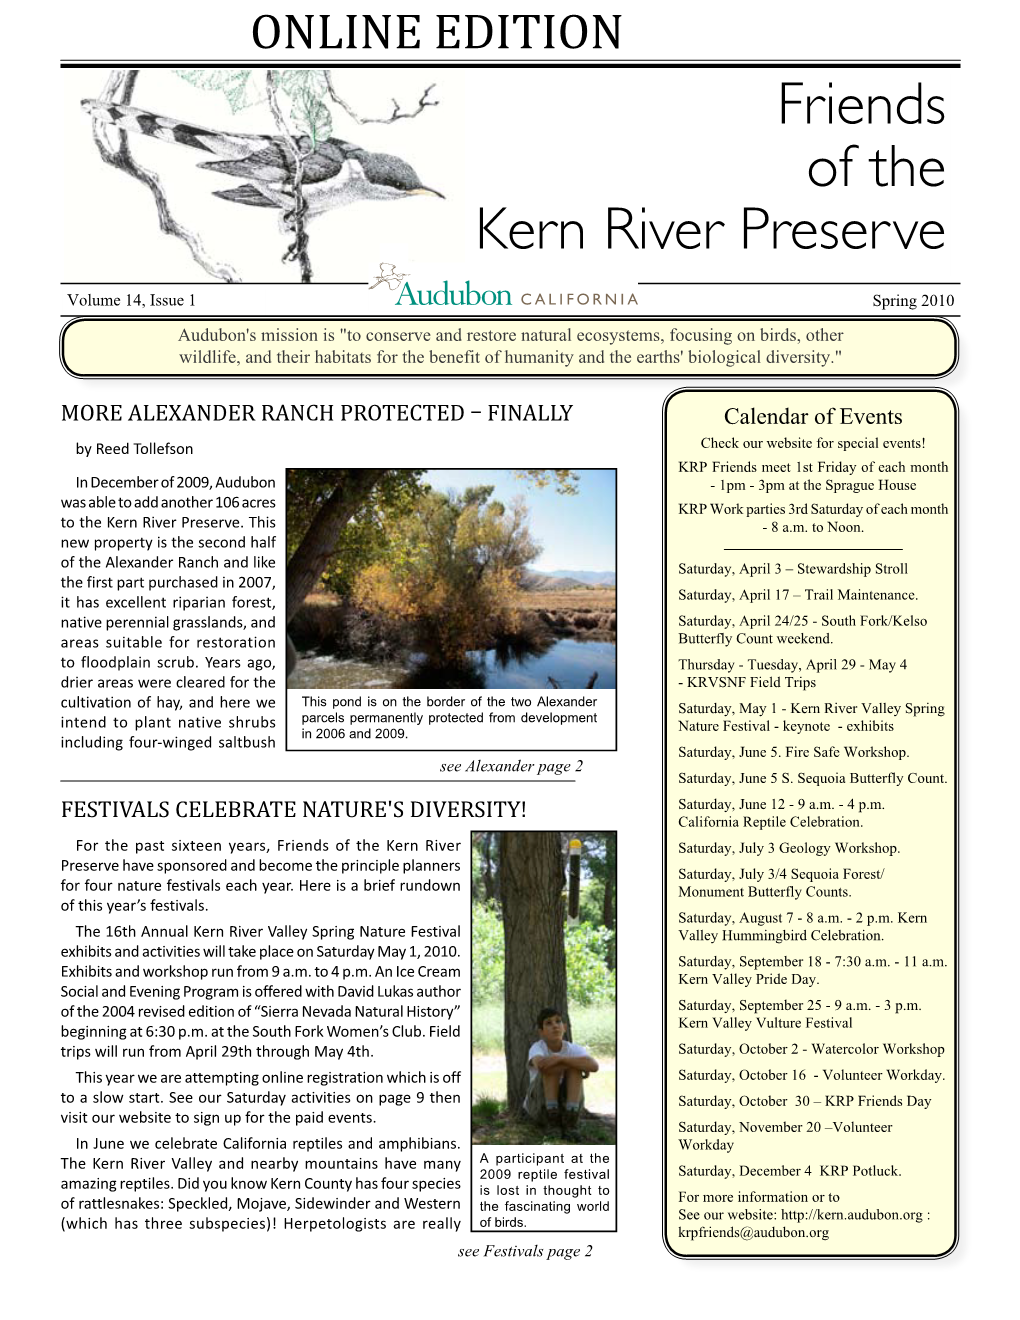 Friends of the Kern River Preserve Spring 2010